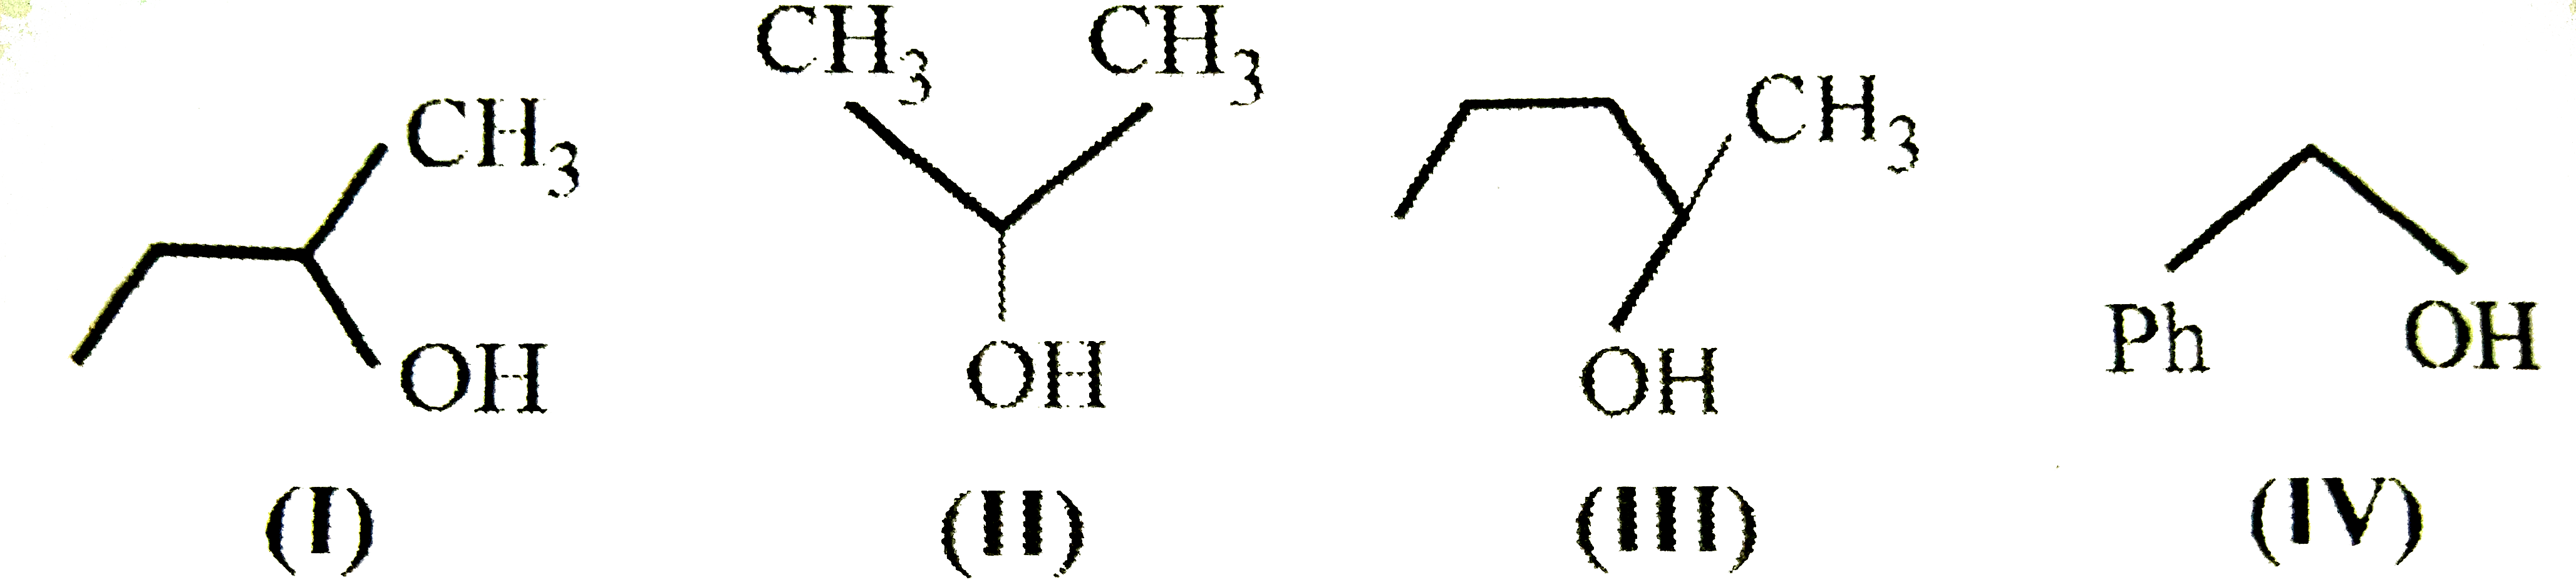 The order of ractivity of the following alcohols towards concentrated HCl is